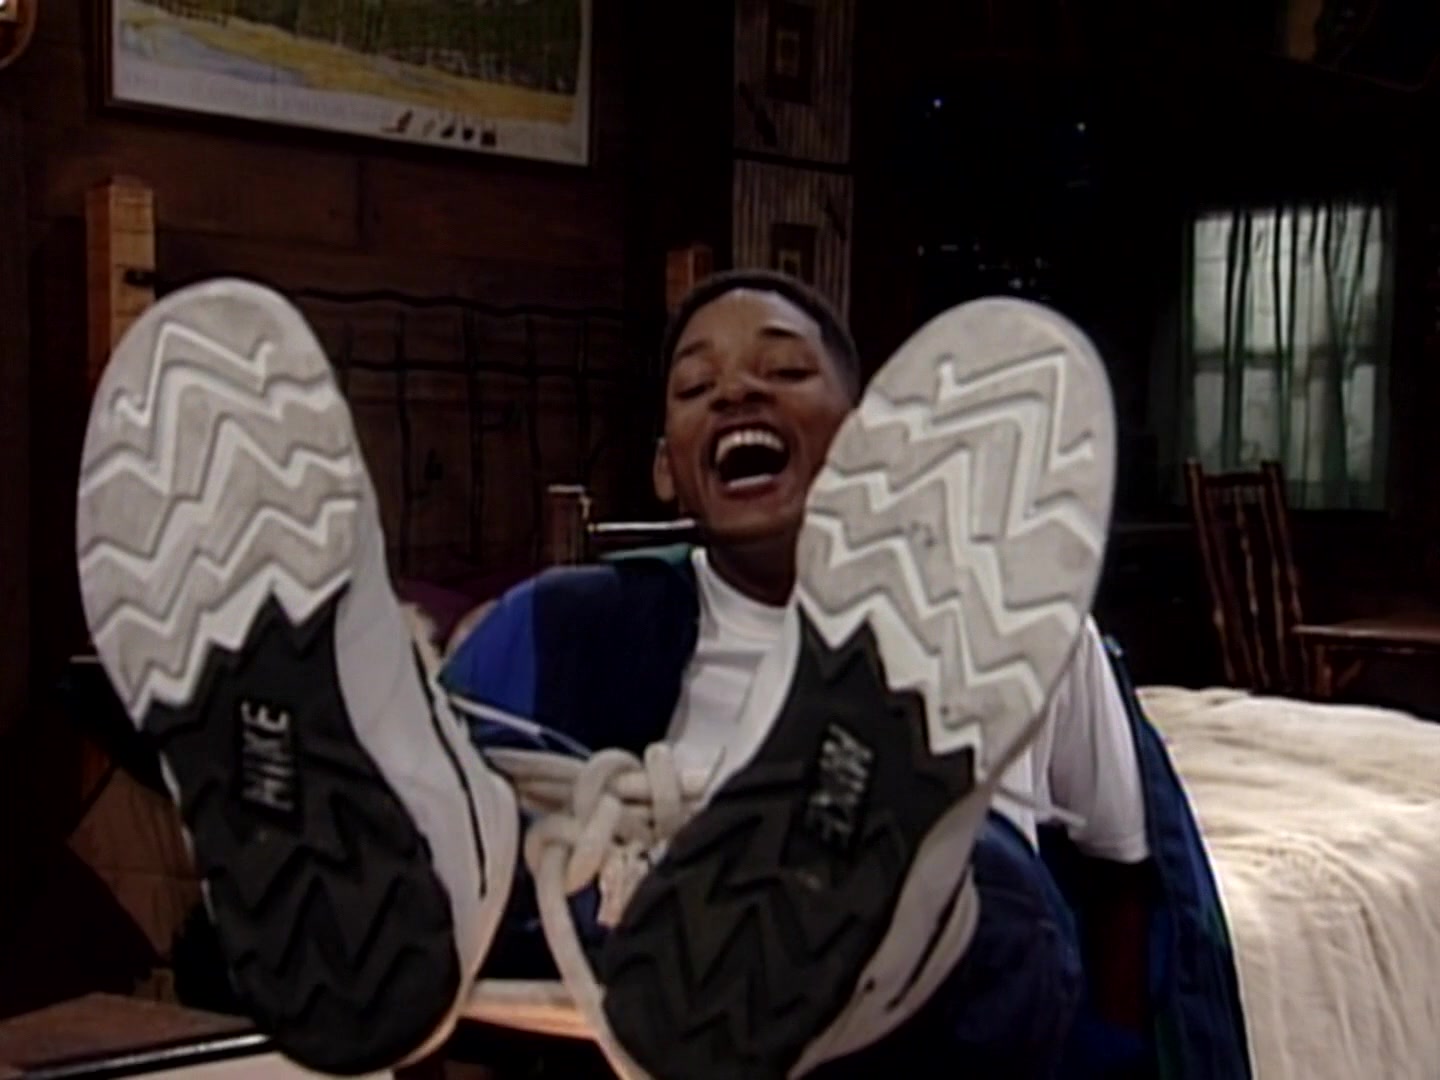 will smith sneakers